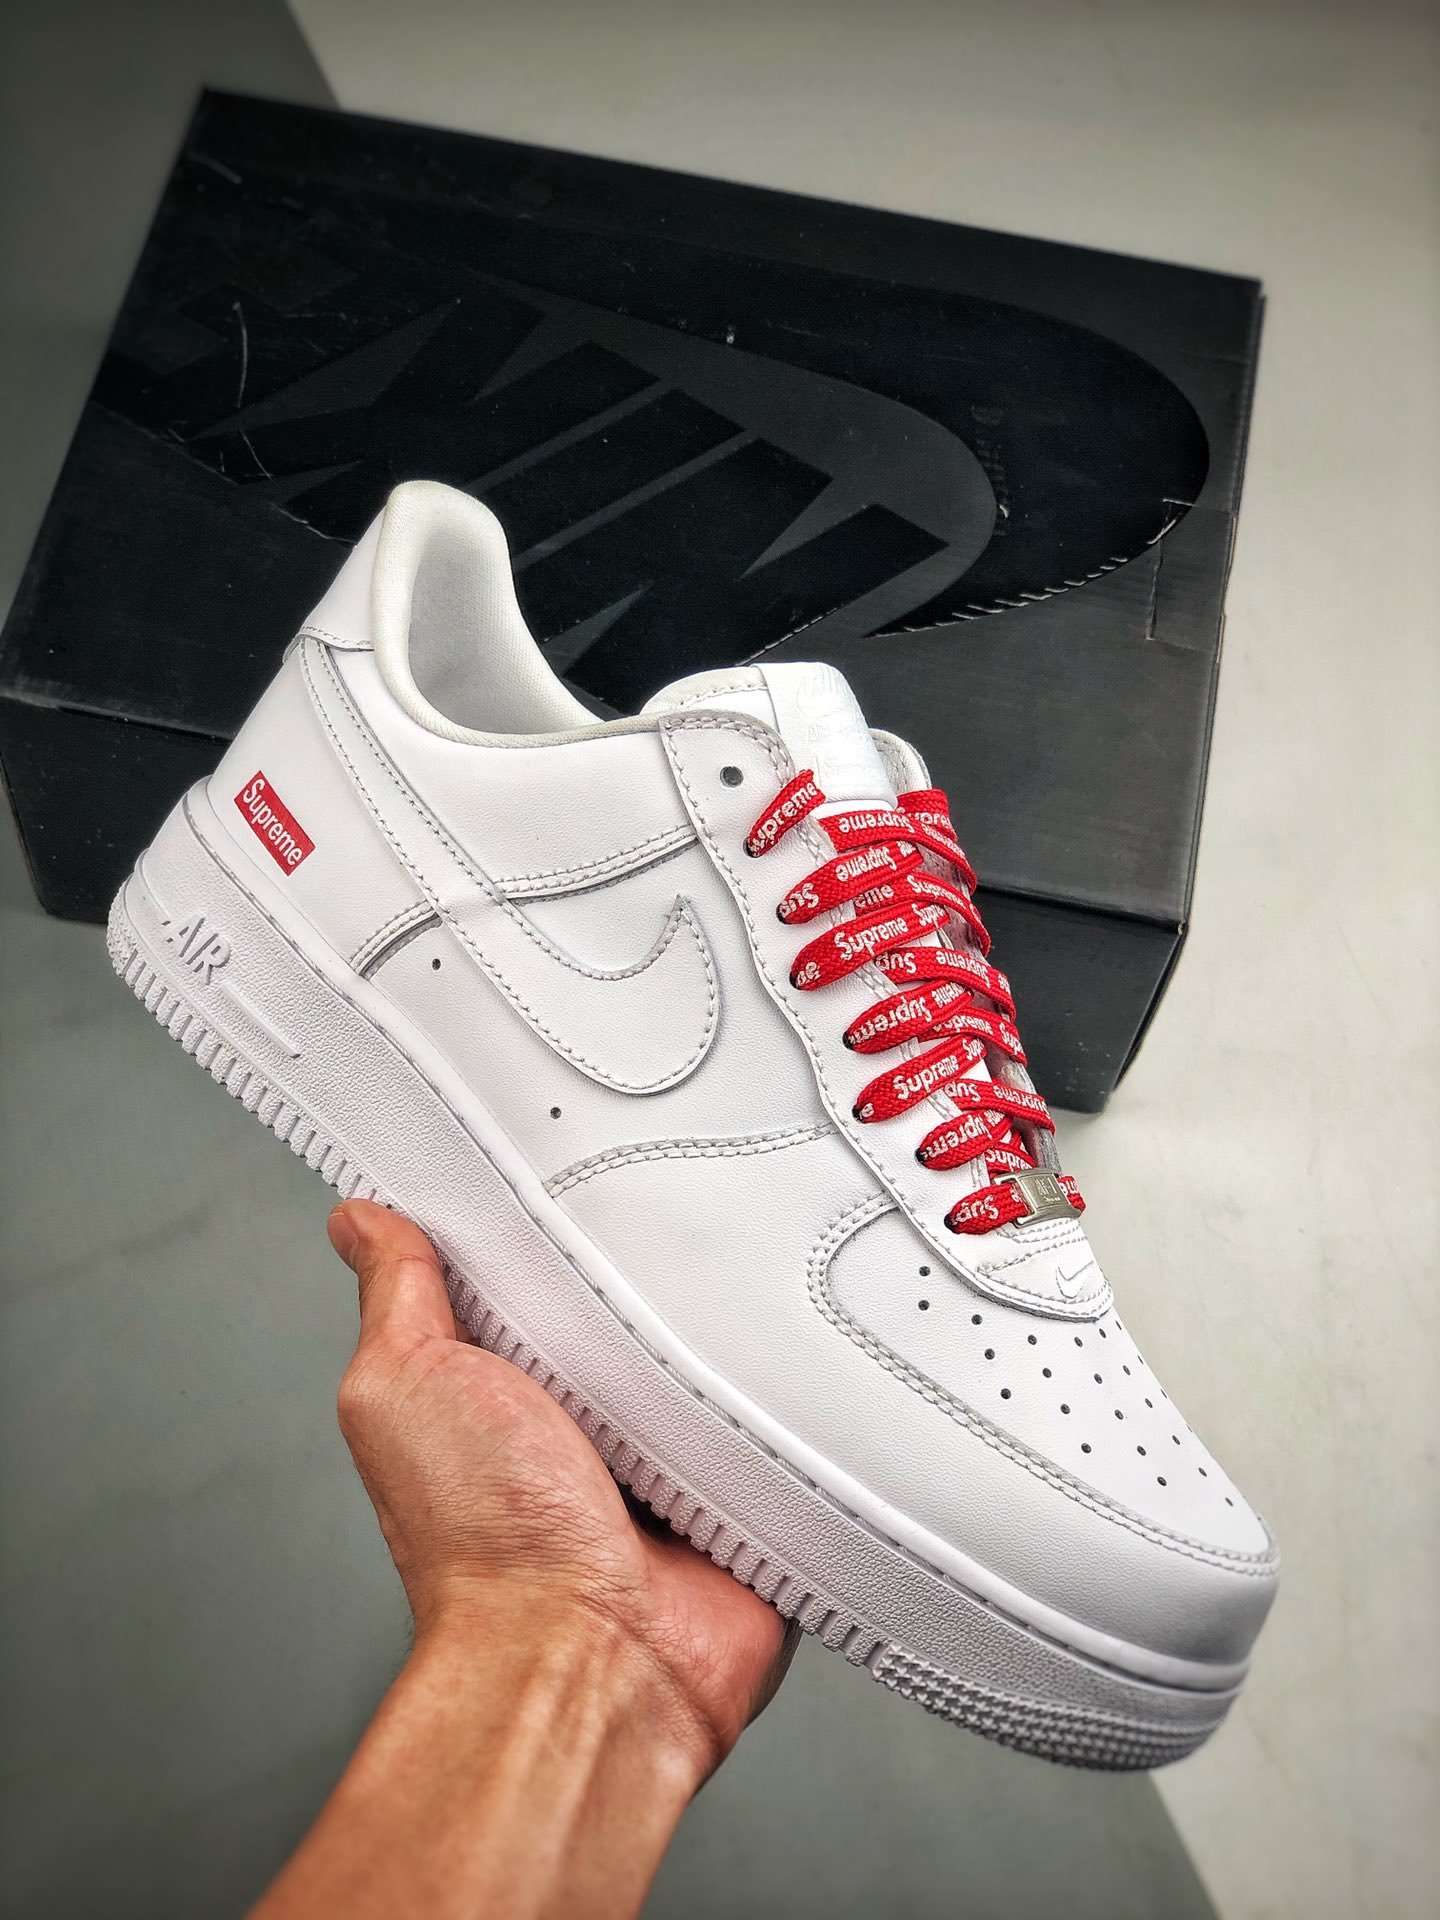 Supreme x Nike Air AF Force 1 Low White CU9225-100 Shoes